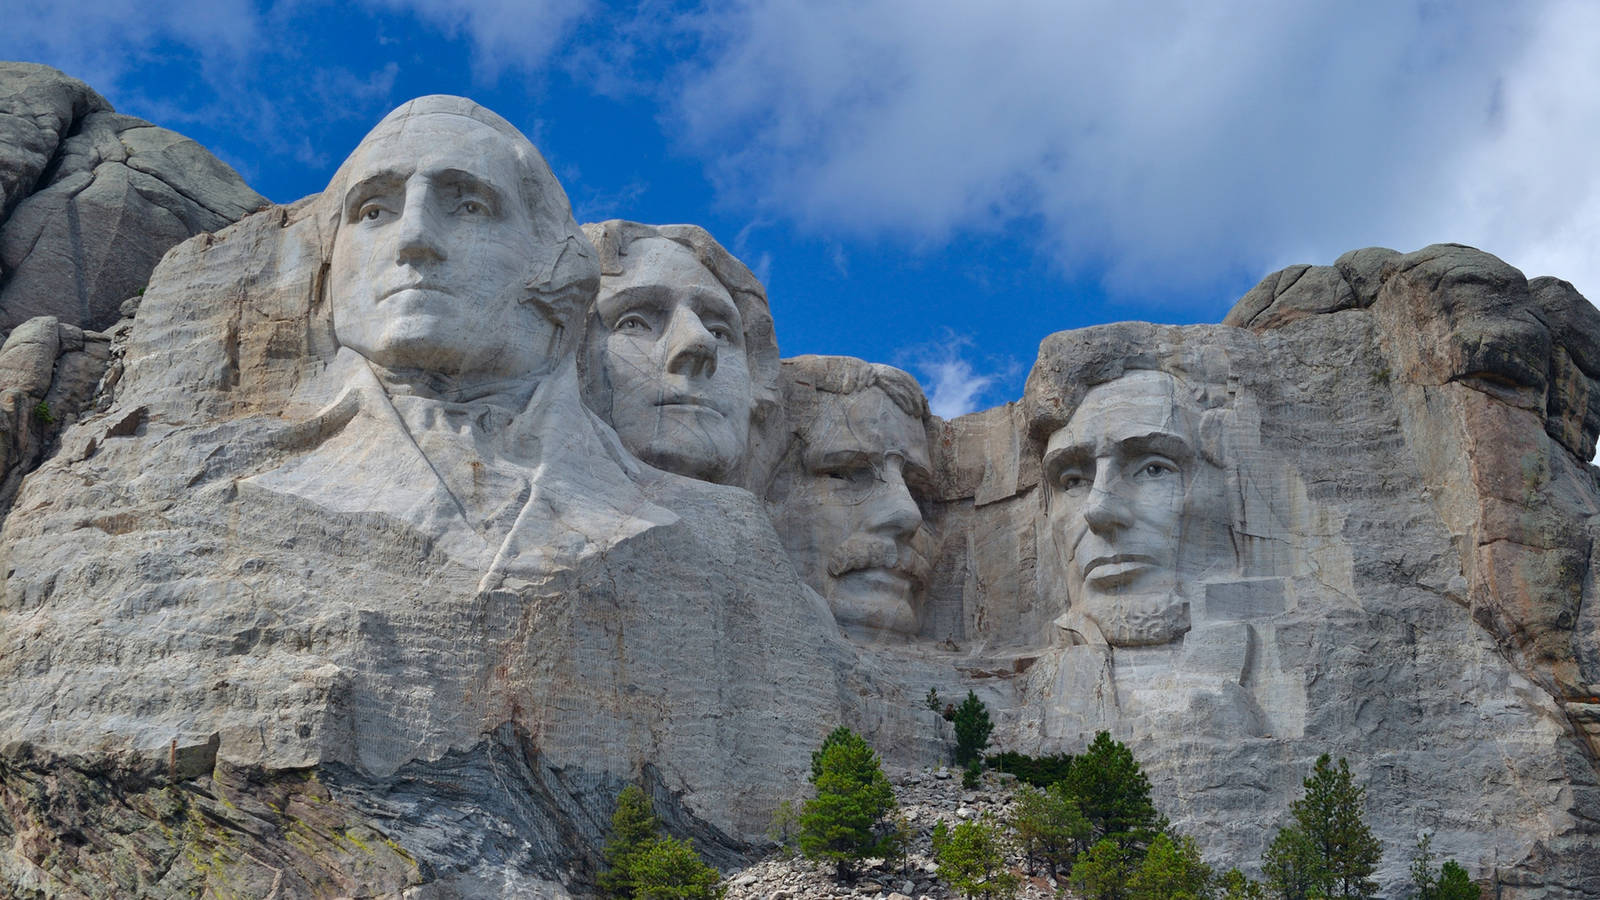 Can You Pass This 🤓 Visual General Knowledge Quiz? Mount Rushmore, South Dakota